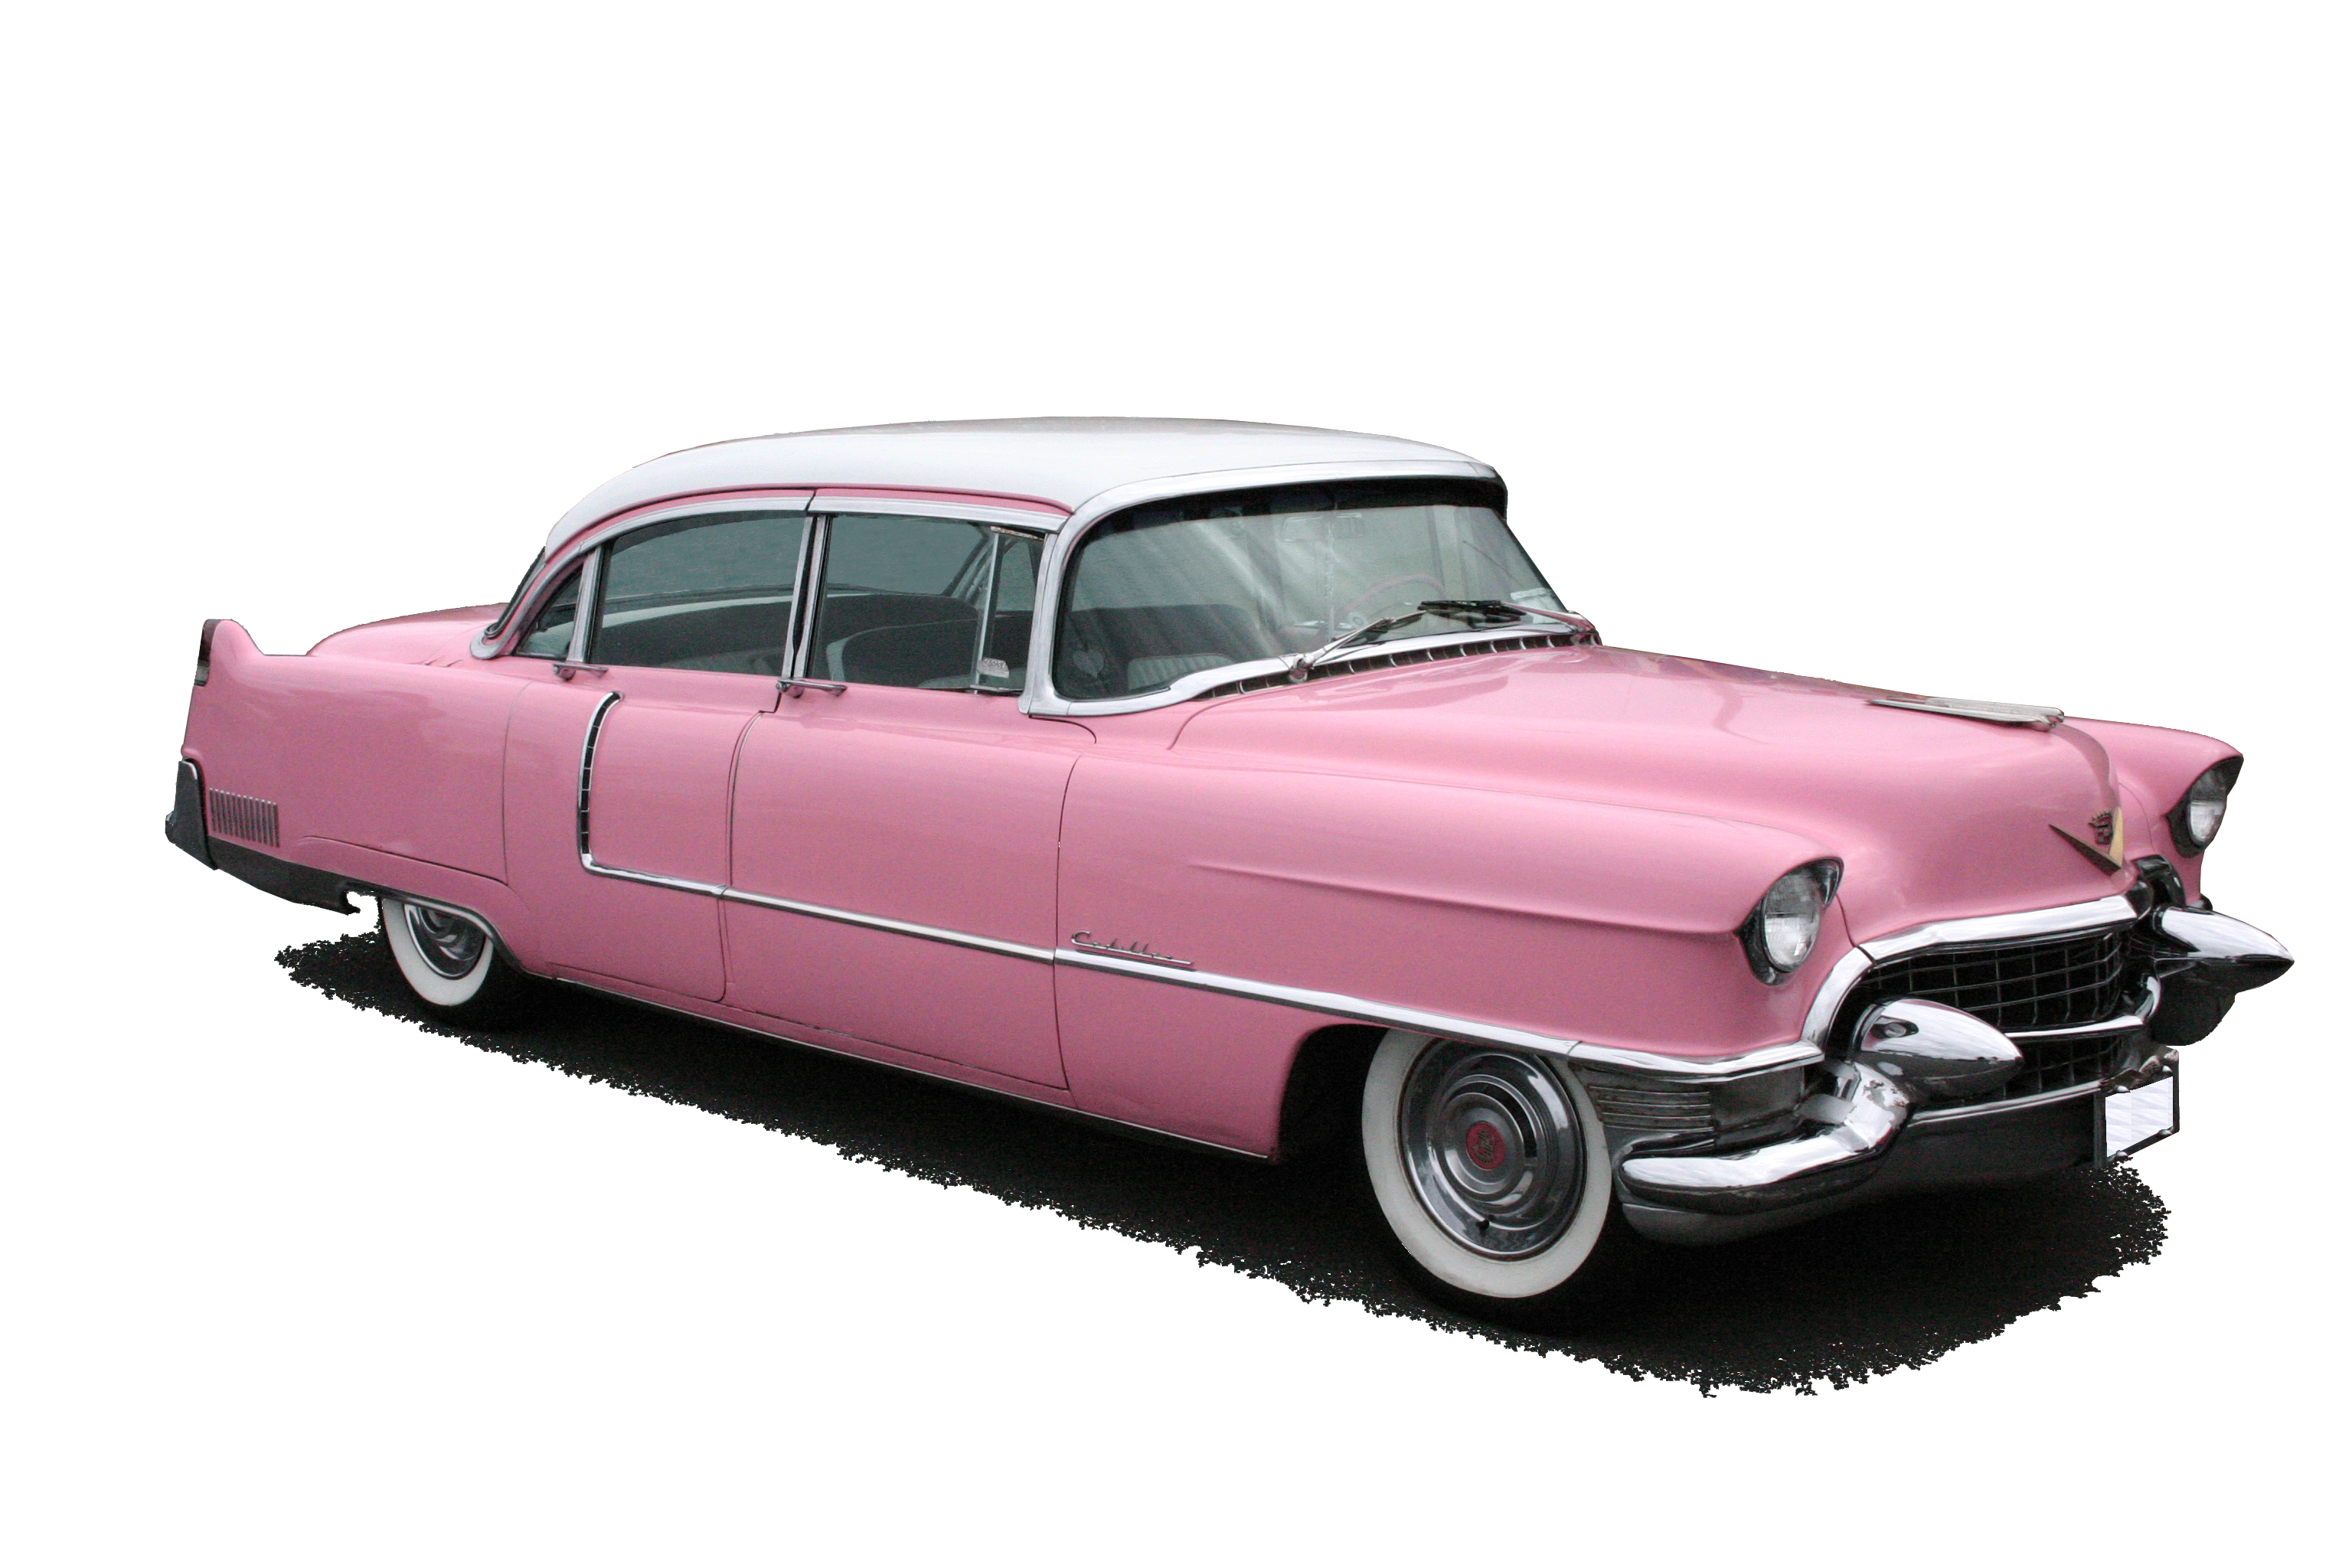 Images of Pink Cadillac 3072x2048. 